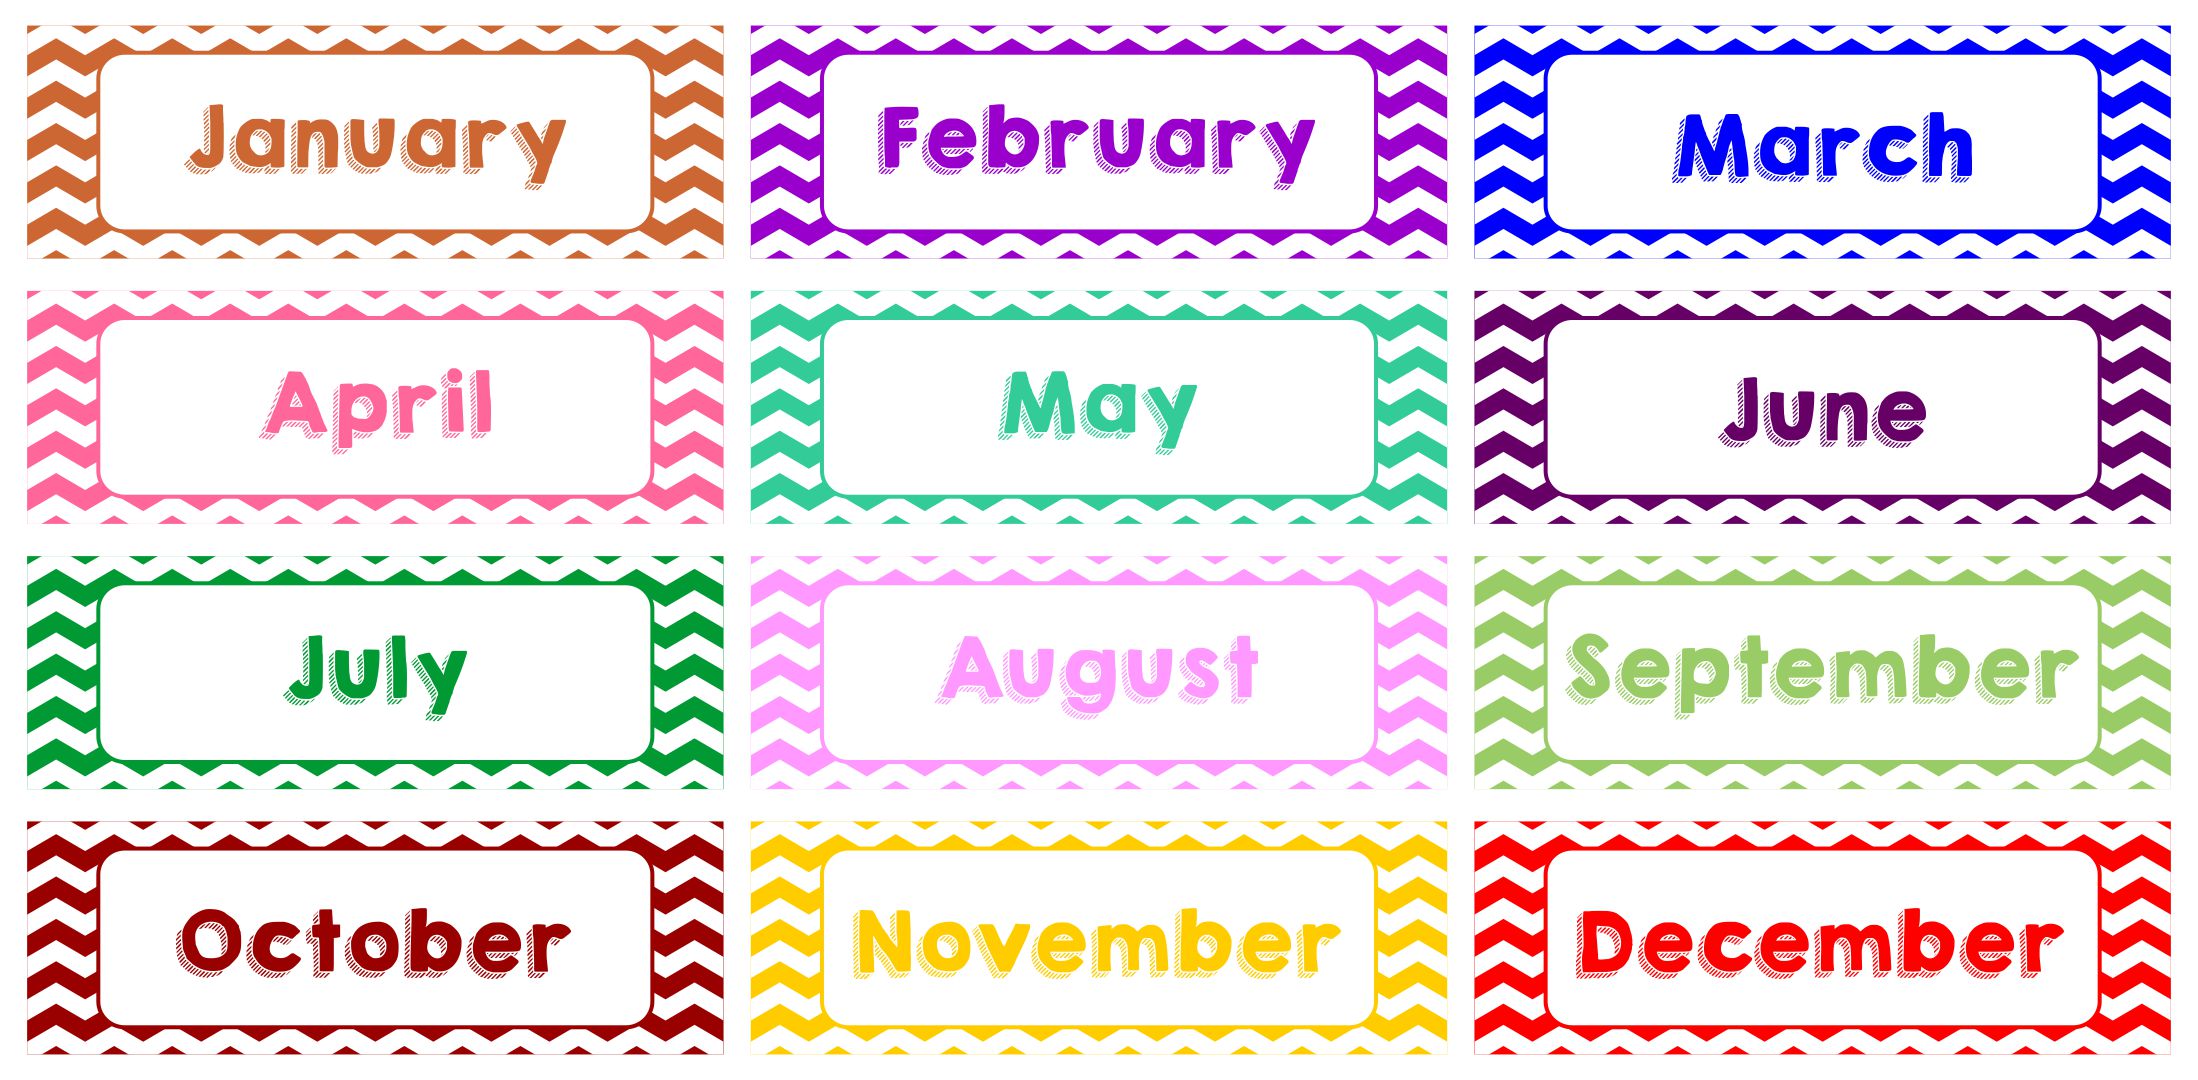 8-best-images-of-printable-calendar-month-labels-free-printable